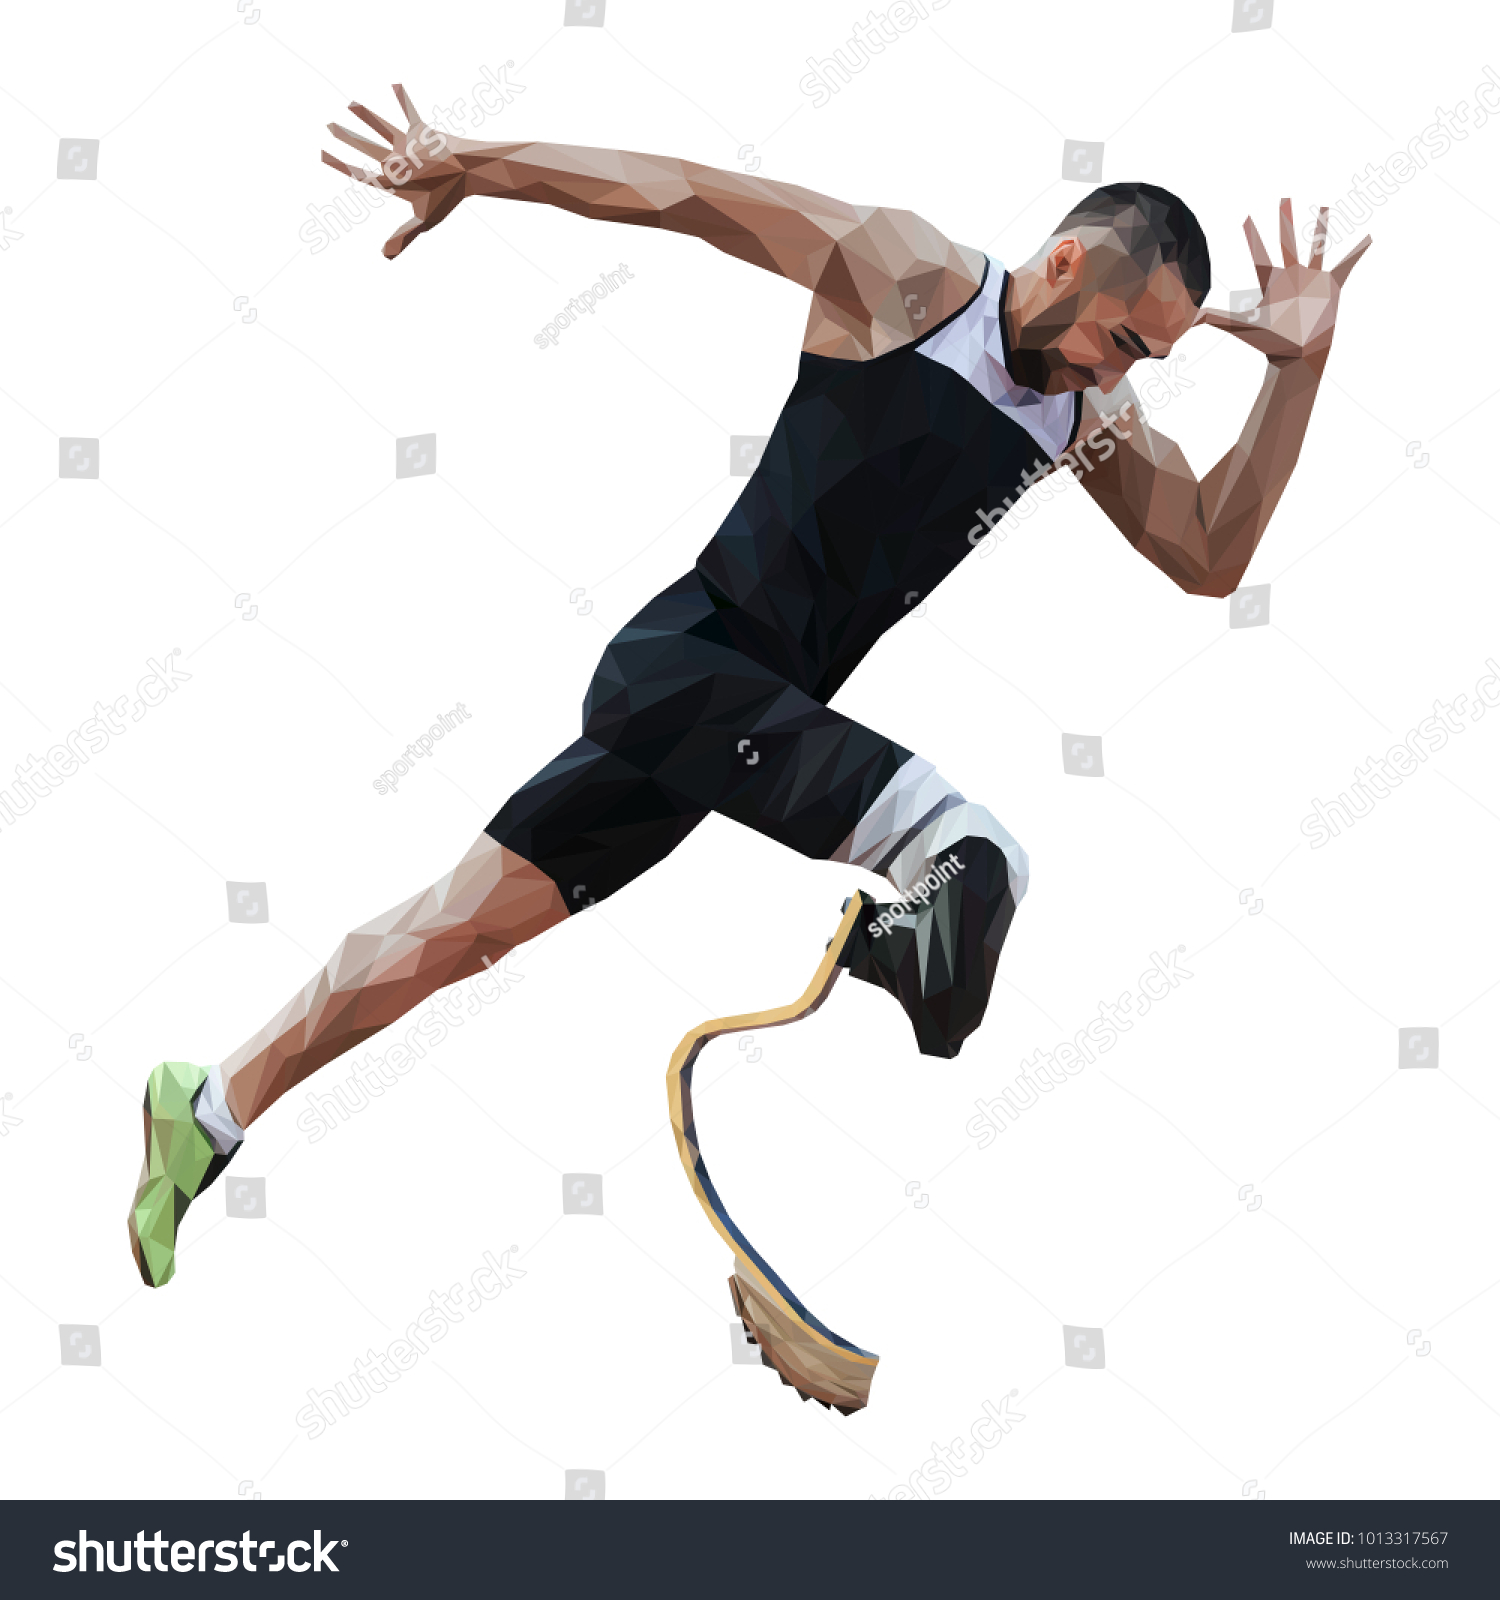 SVG of athlete disabled amputee runner prosthetic leg svg